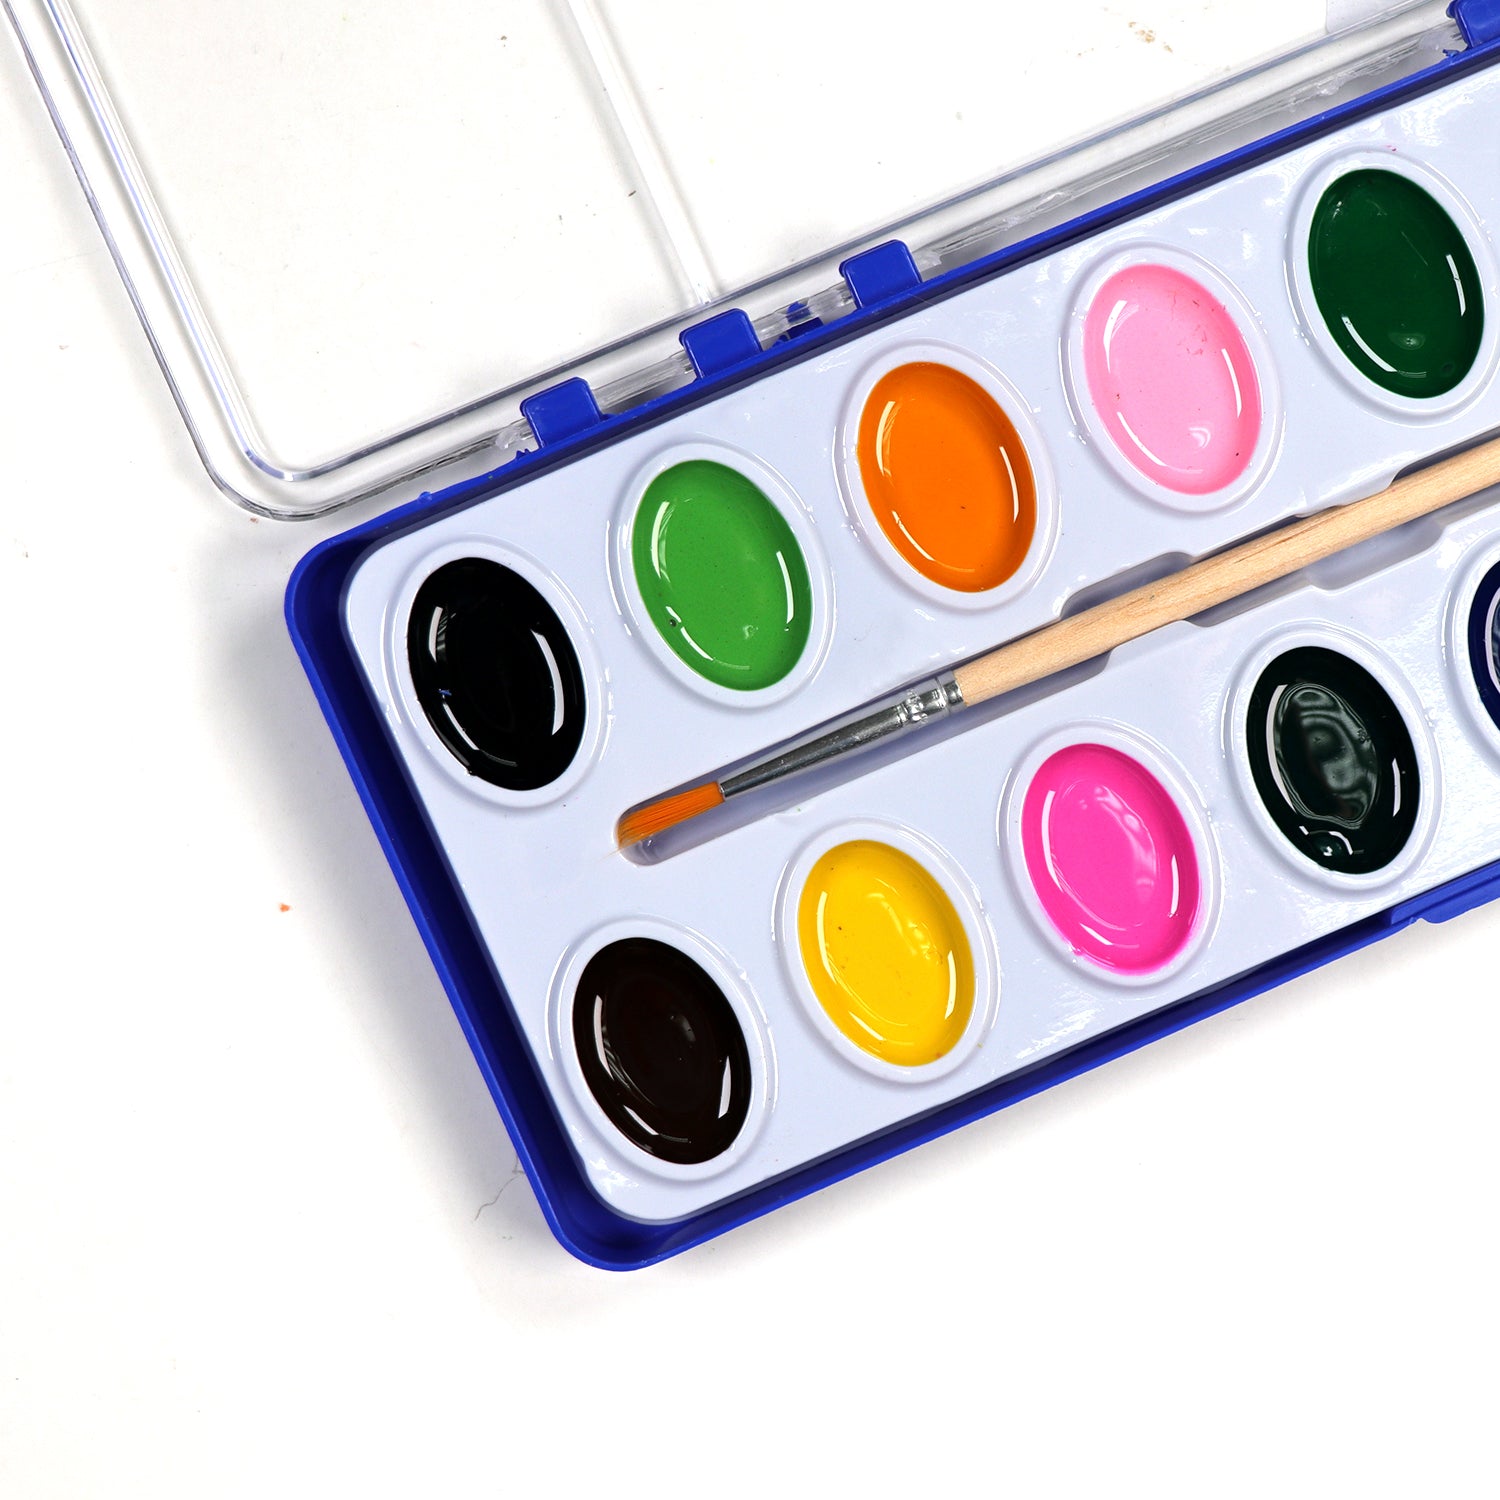 18 Set Watercolor Paint Pack with Quality Wood Brushes 16 Colors